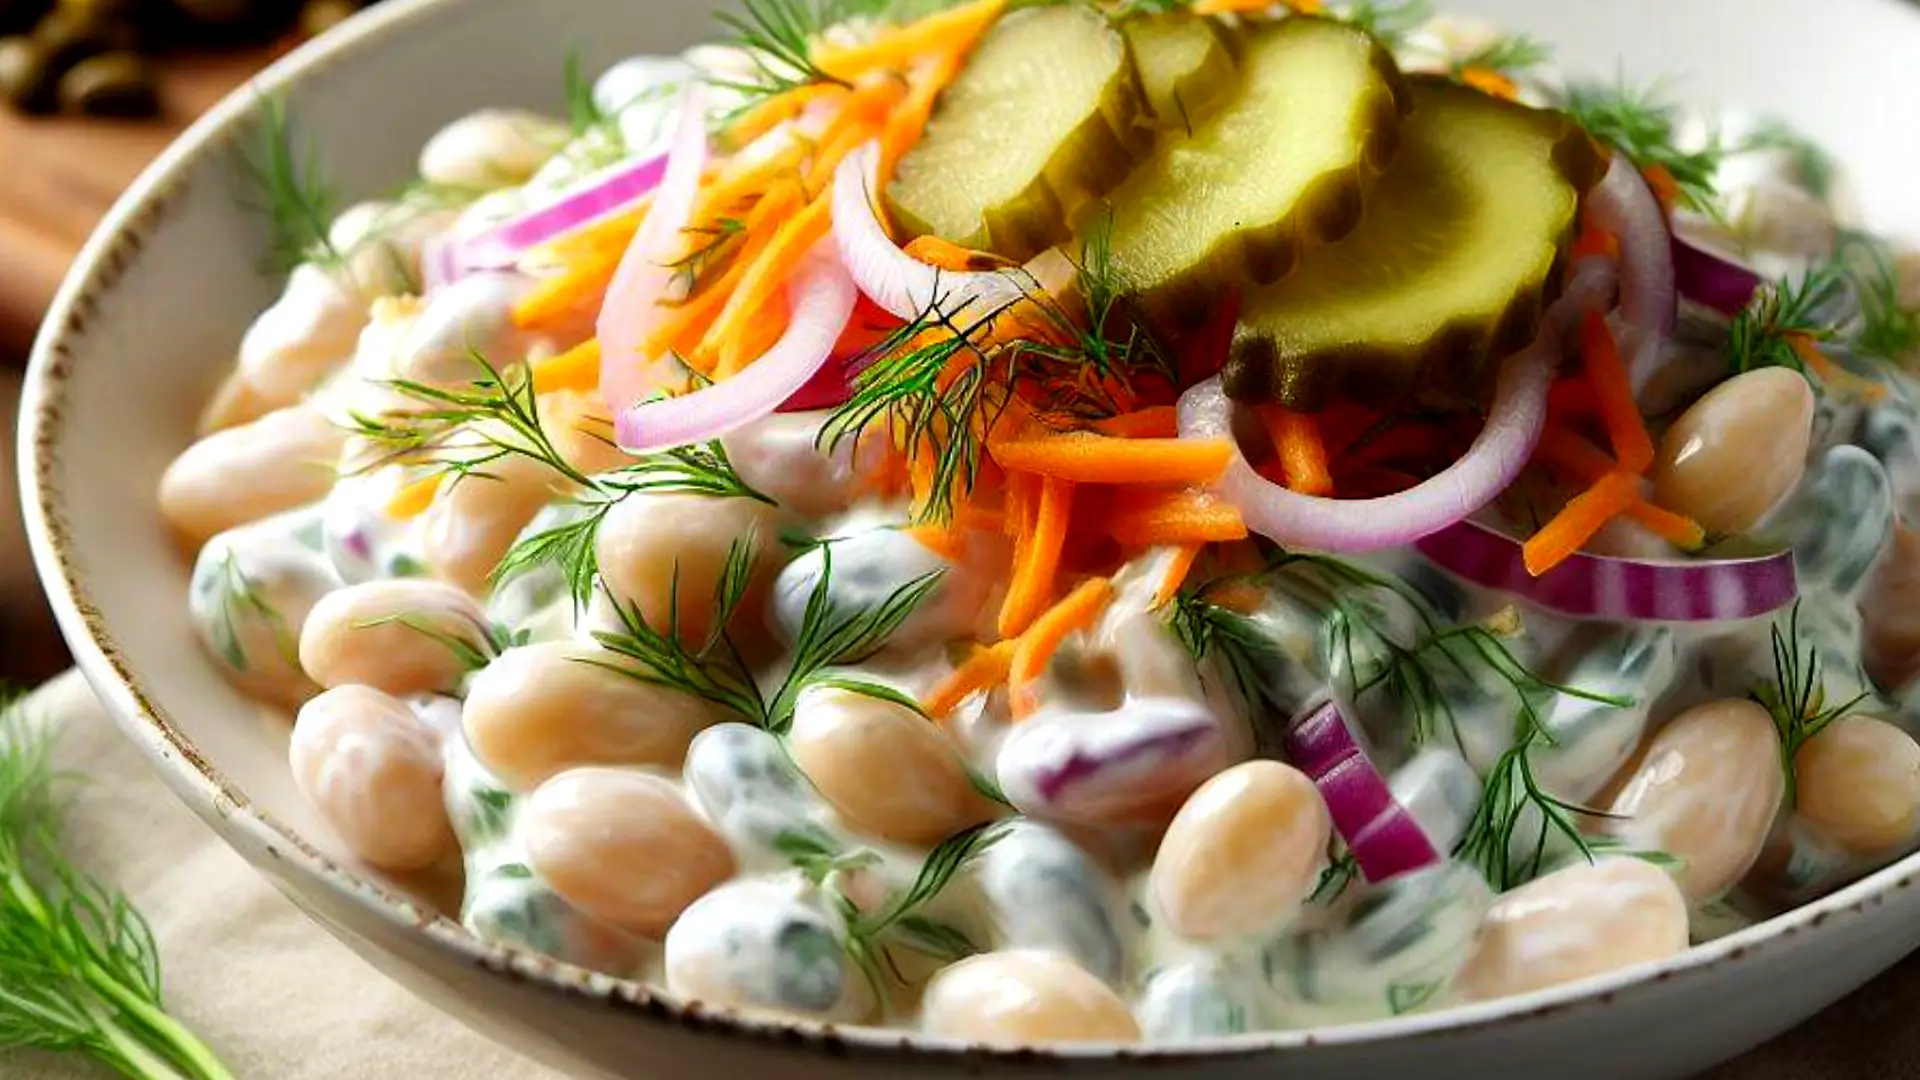 White Bean Salad Recipe with Mayonnaise, Red Onions, Carrots, and Pickles 5 (5)